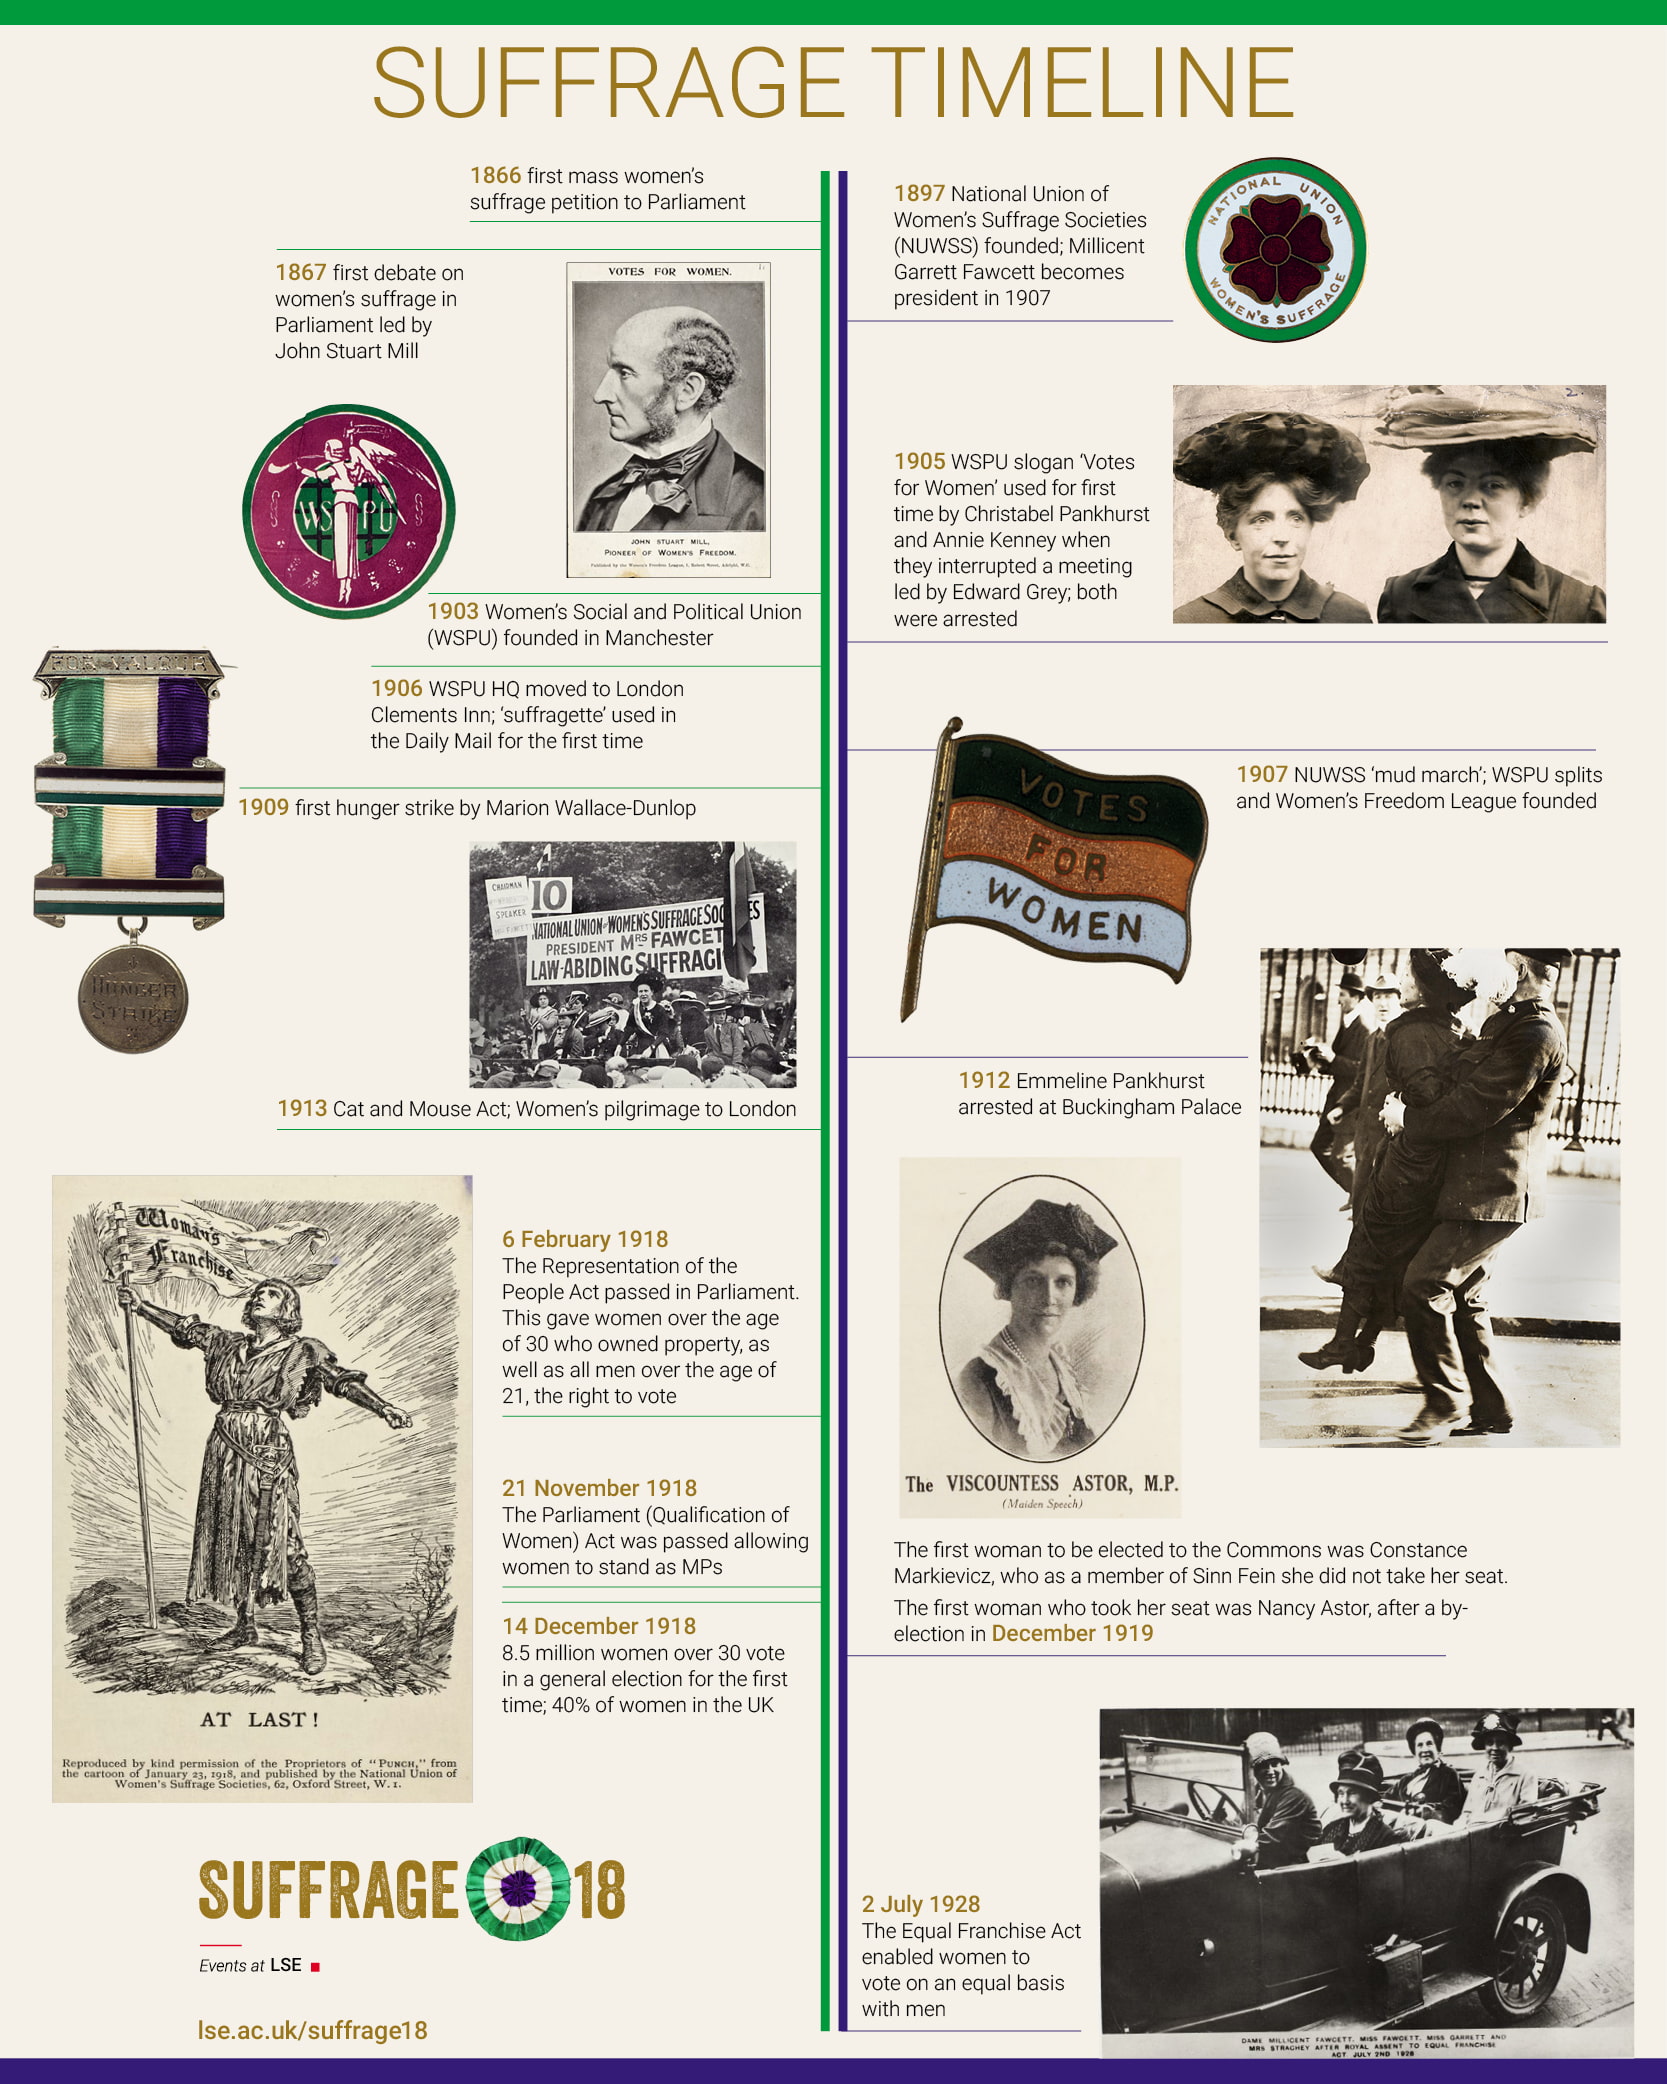 A timeline showing the march toward the act of suffrage in 1918